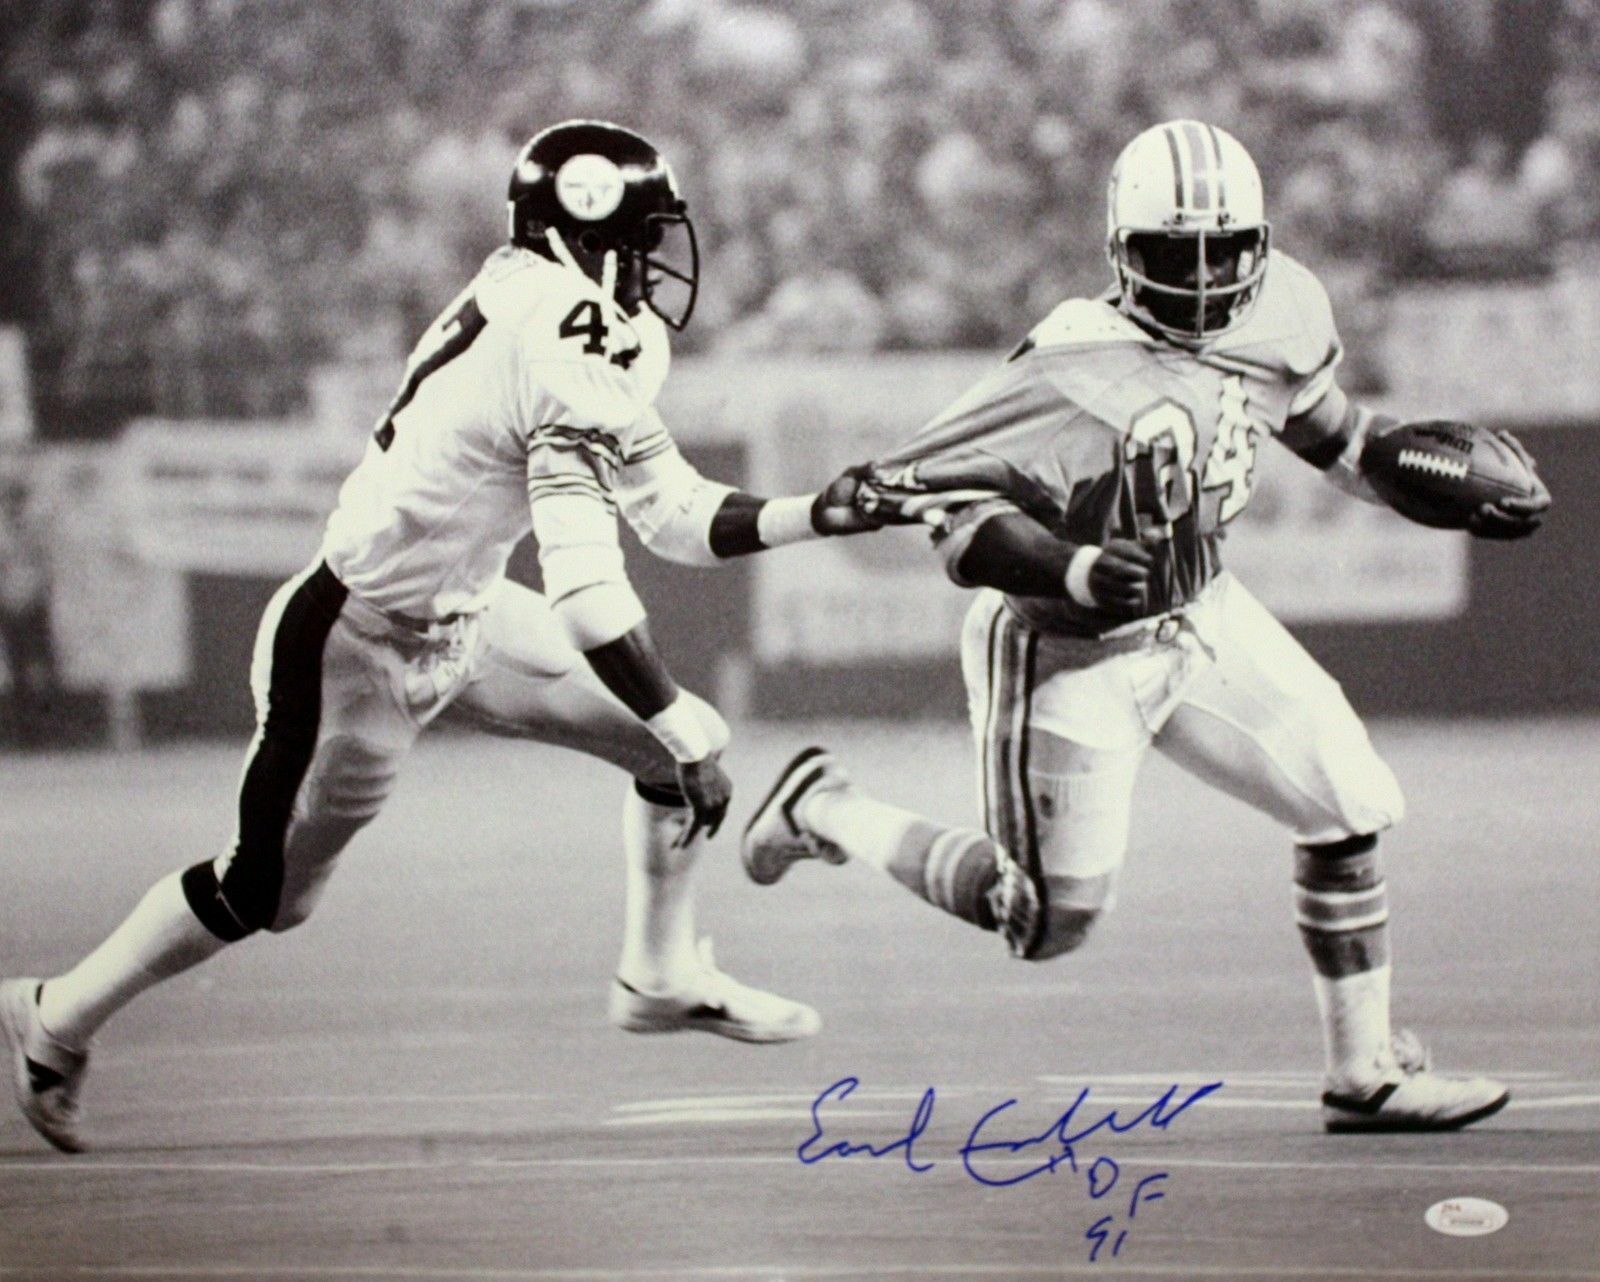 Earl Campbell Autographed Oilers 16x20 B&W Against Steelers Photo Poster painting- JSA W Auth